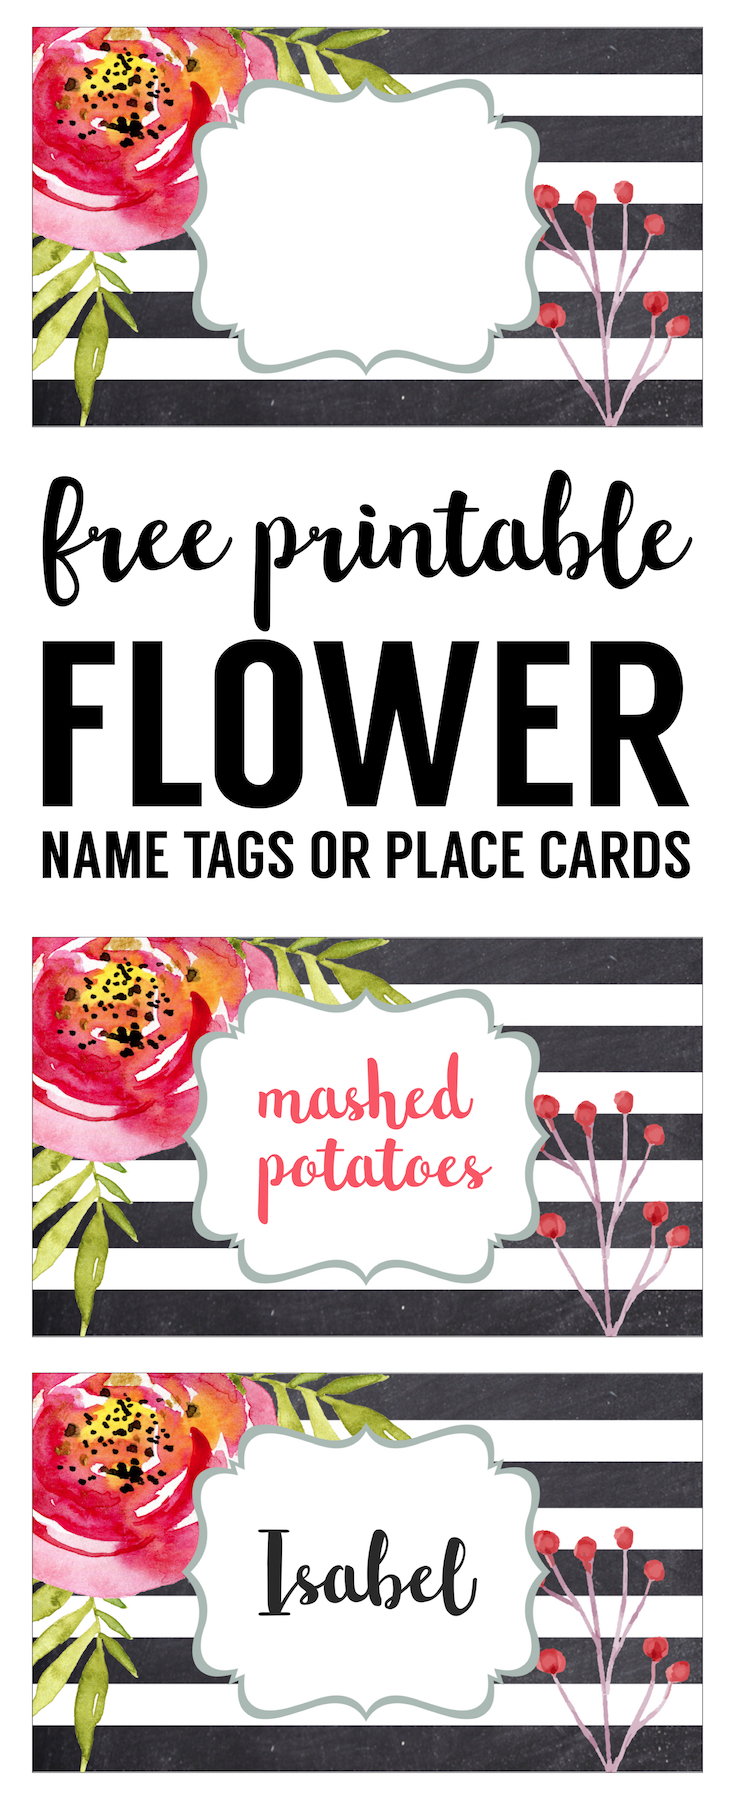 Flower Place Card Holder or Food Labels Free Printable. Great DIY name tags or food tags for birthday parties, baby shower, bridal shower, wedding, spring party, or garden party. 